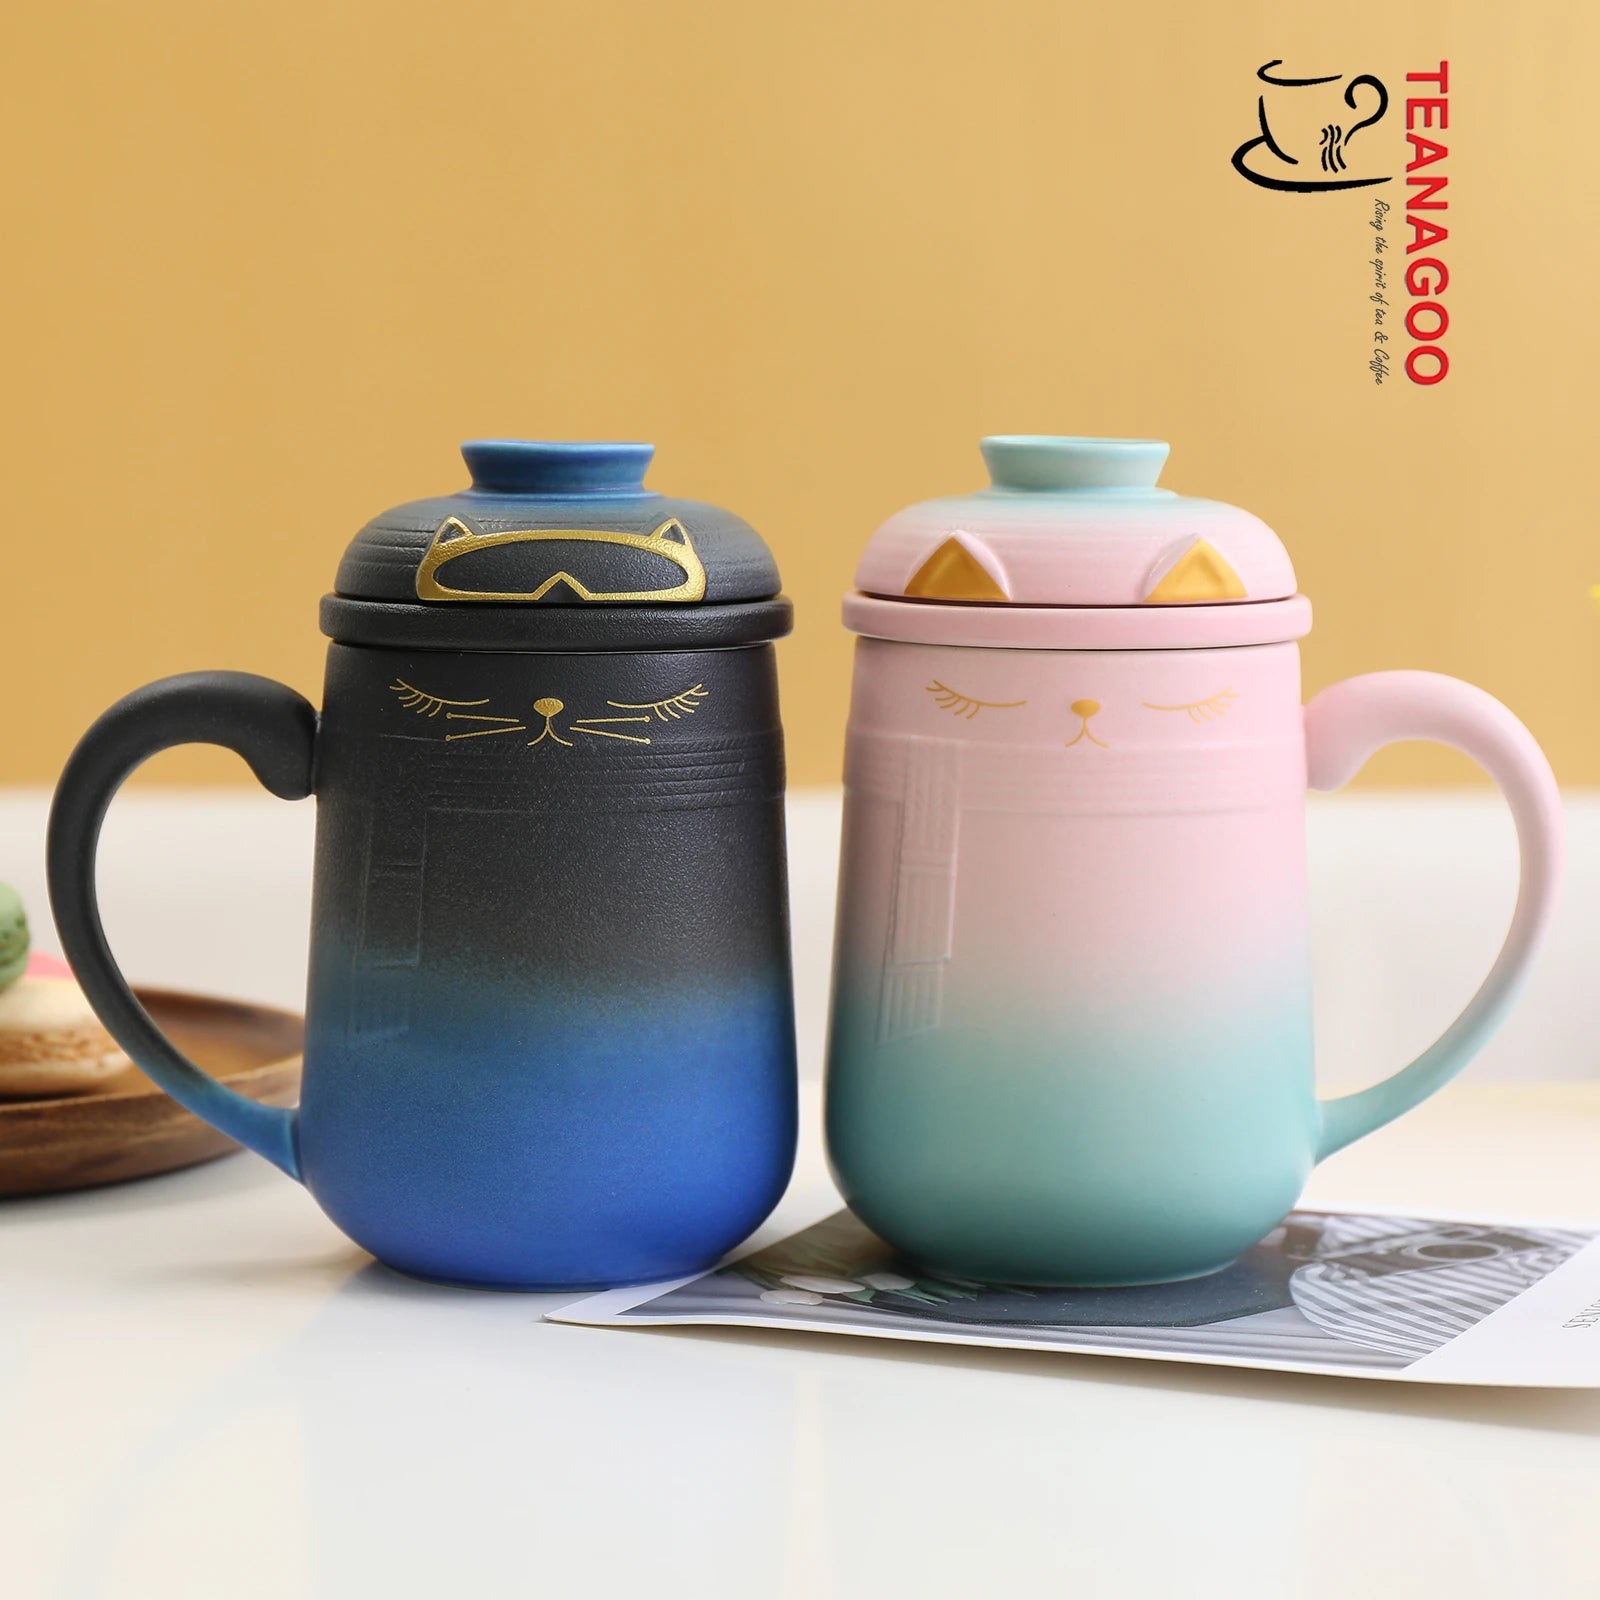 Ceramic Lovely Cat Tea Mug with Infuser & Color Box packing